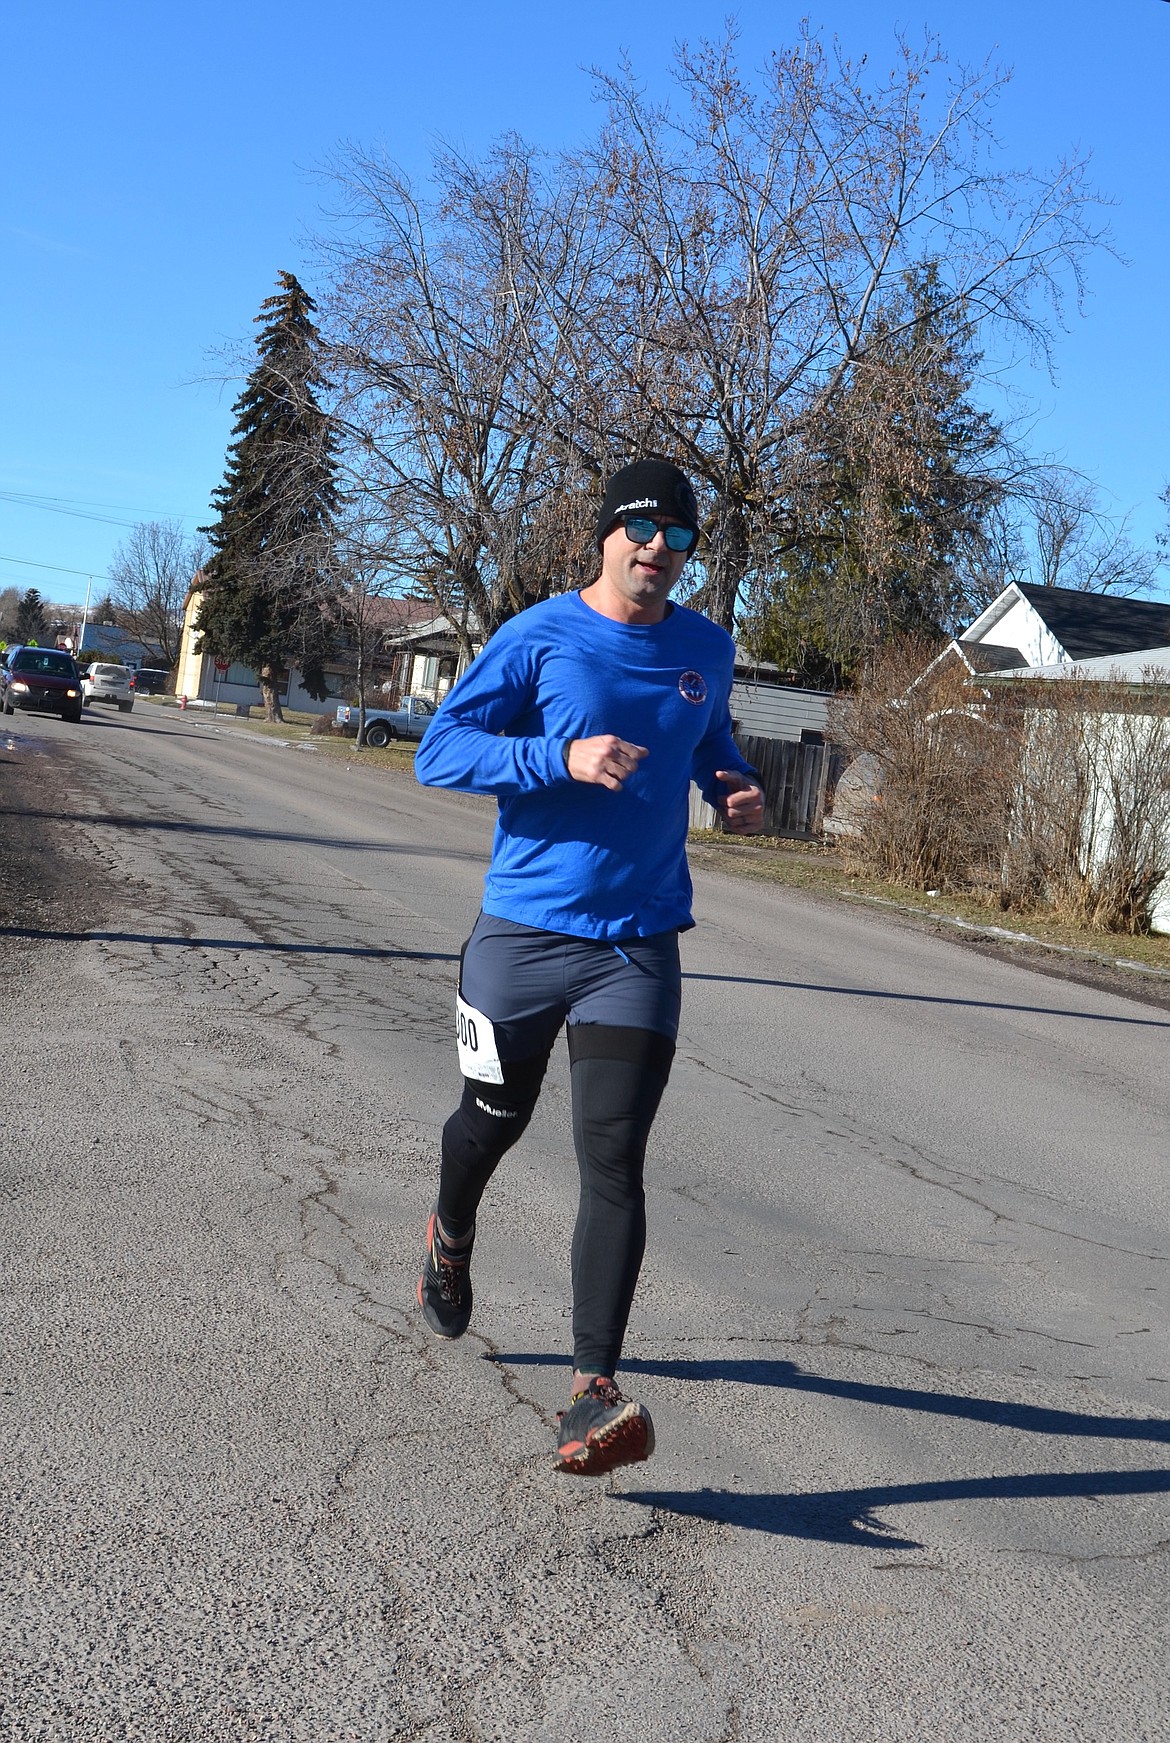 One of the front runners in the Sorry Bout That marathon, help Saturday in Polson. (Kristi Niemeyer/Leader)